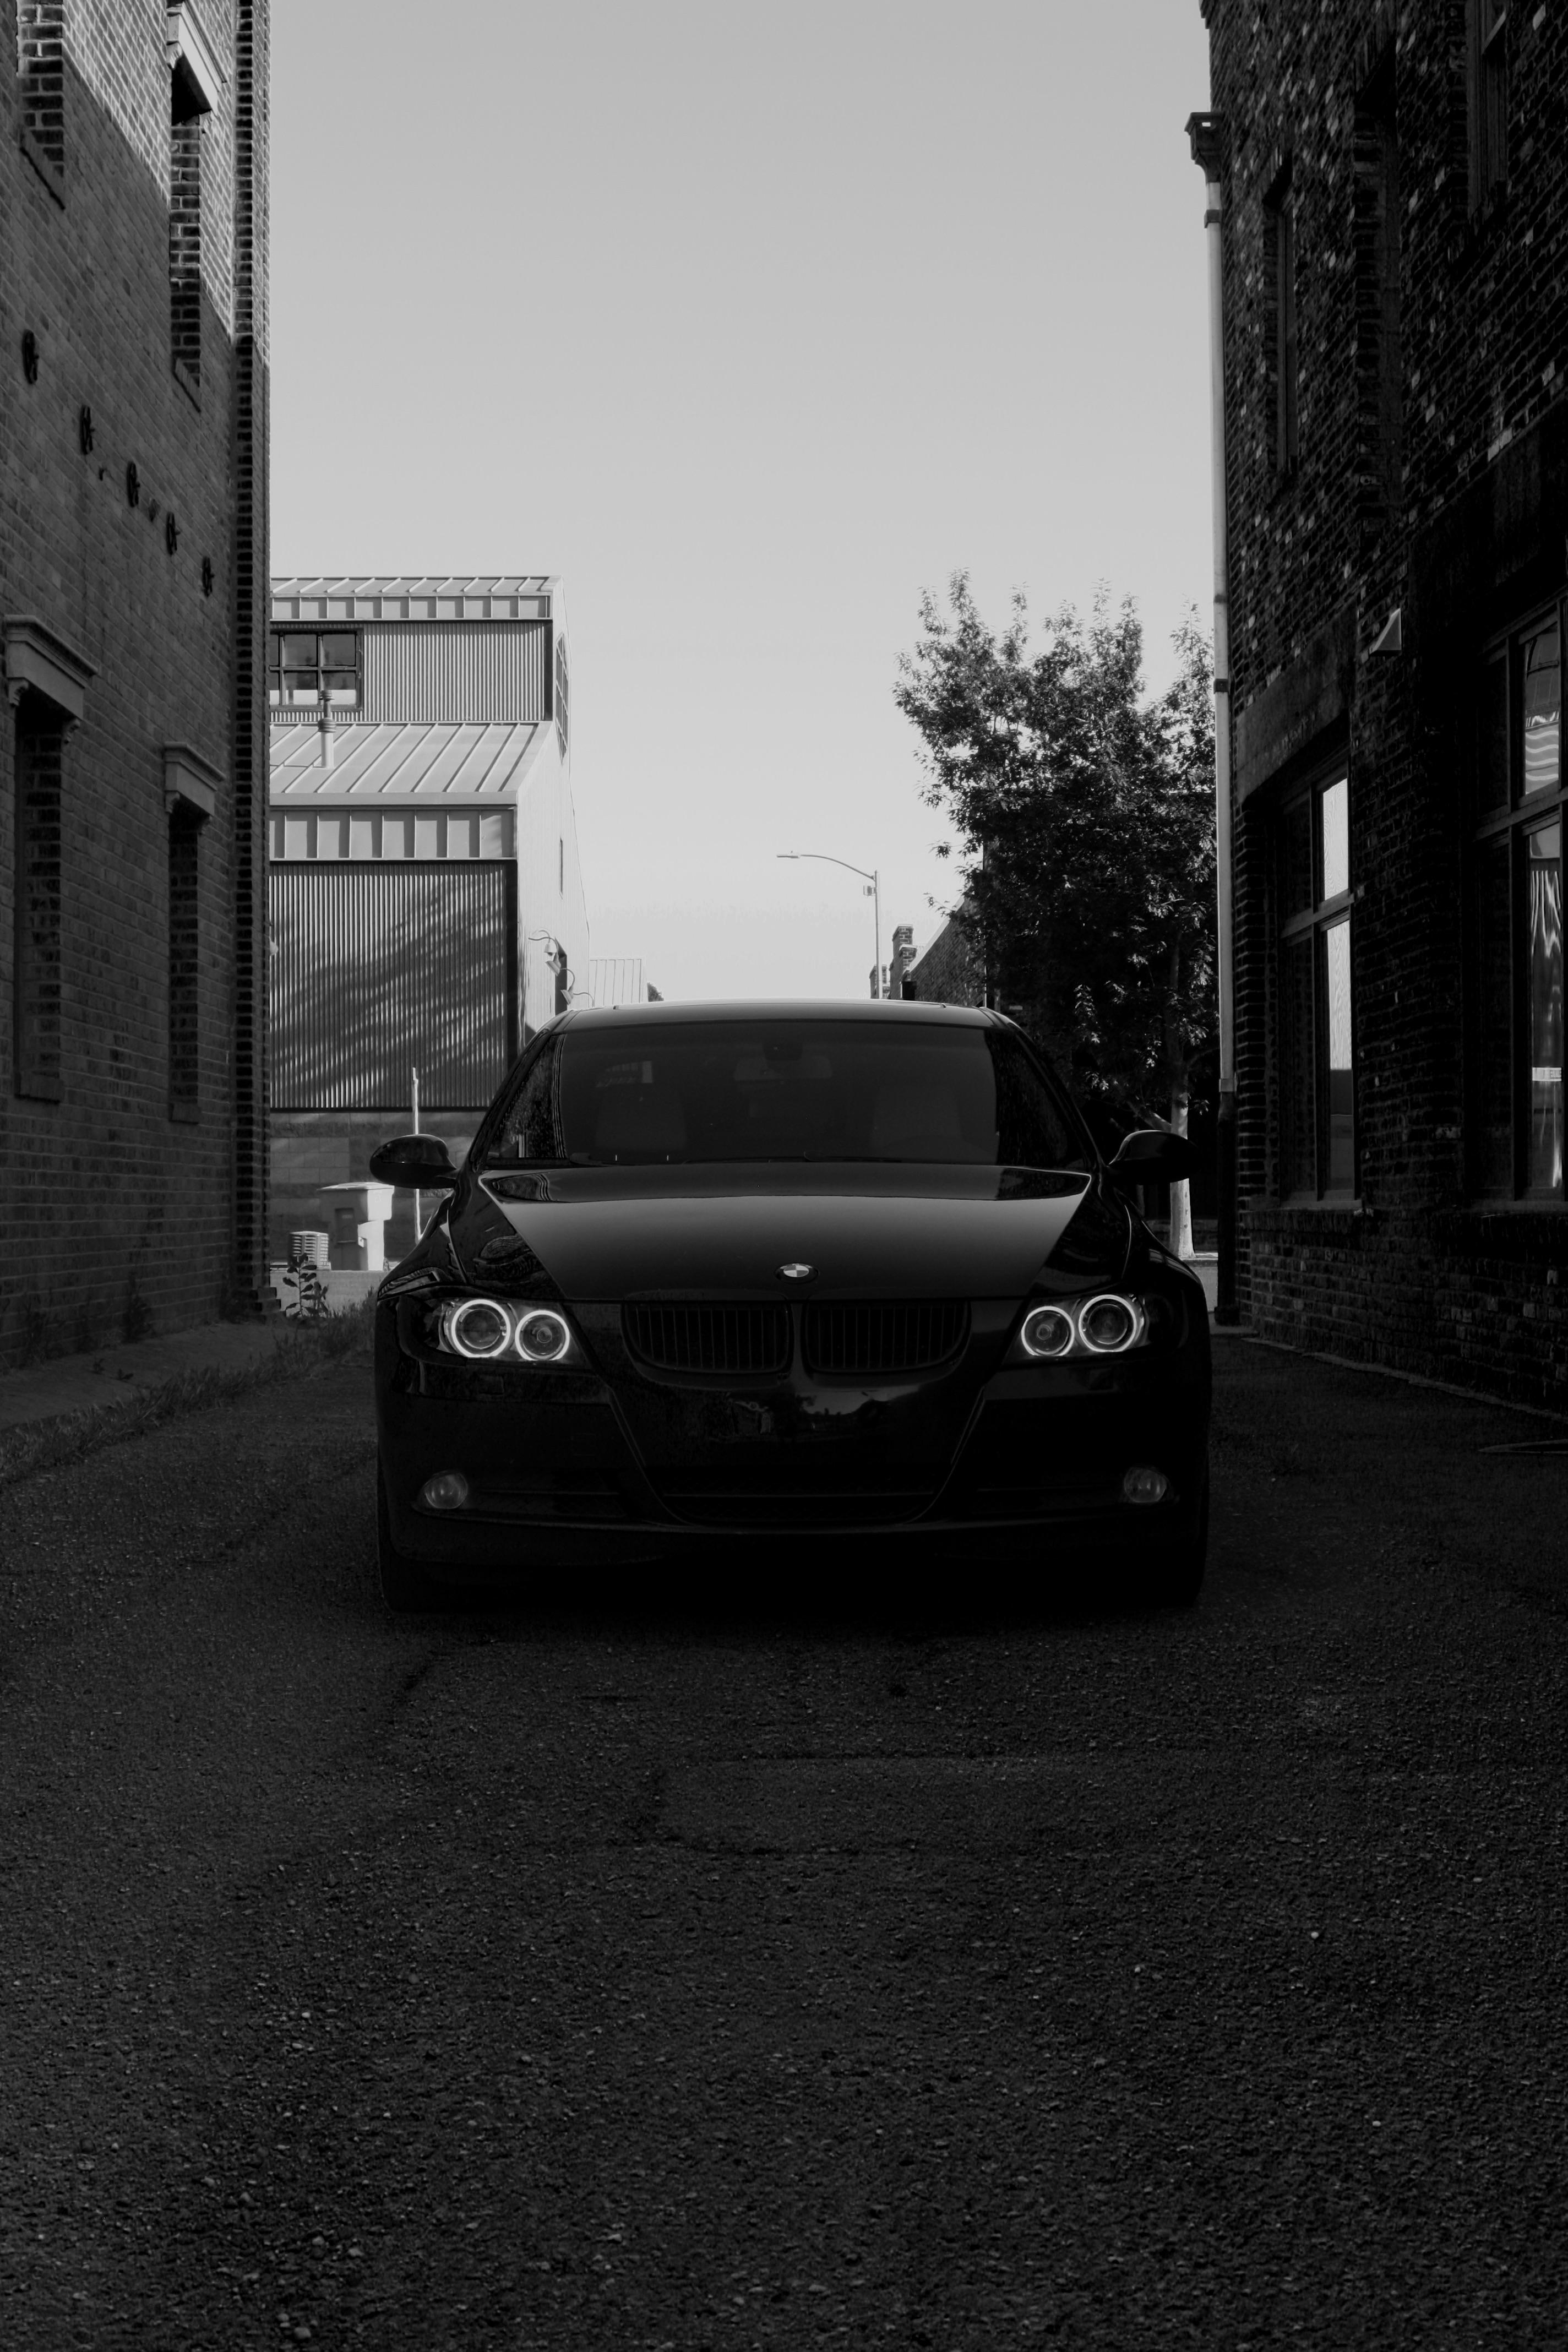 E90 Wallpaper Just took some new pics! More to come